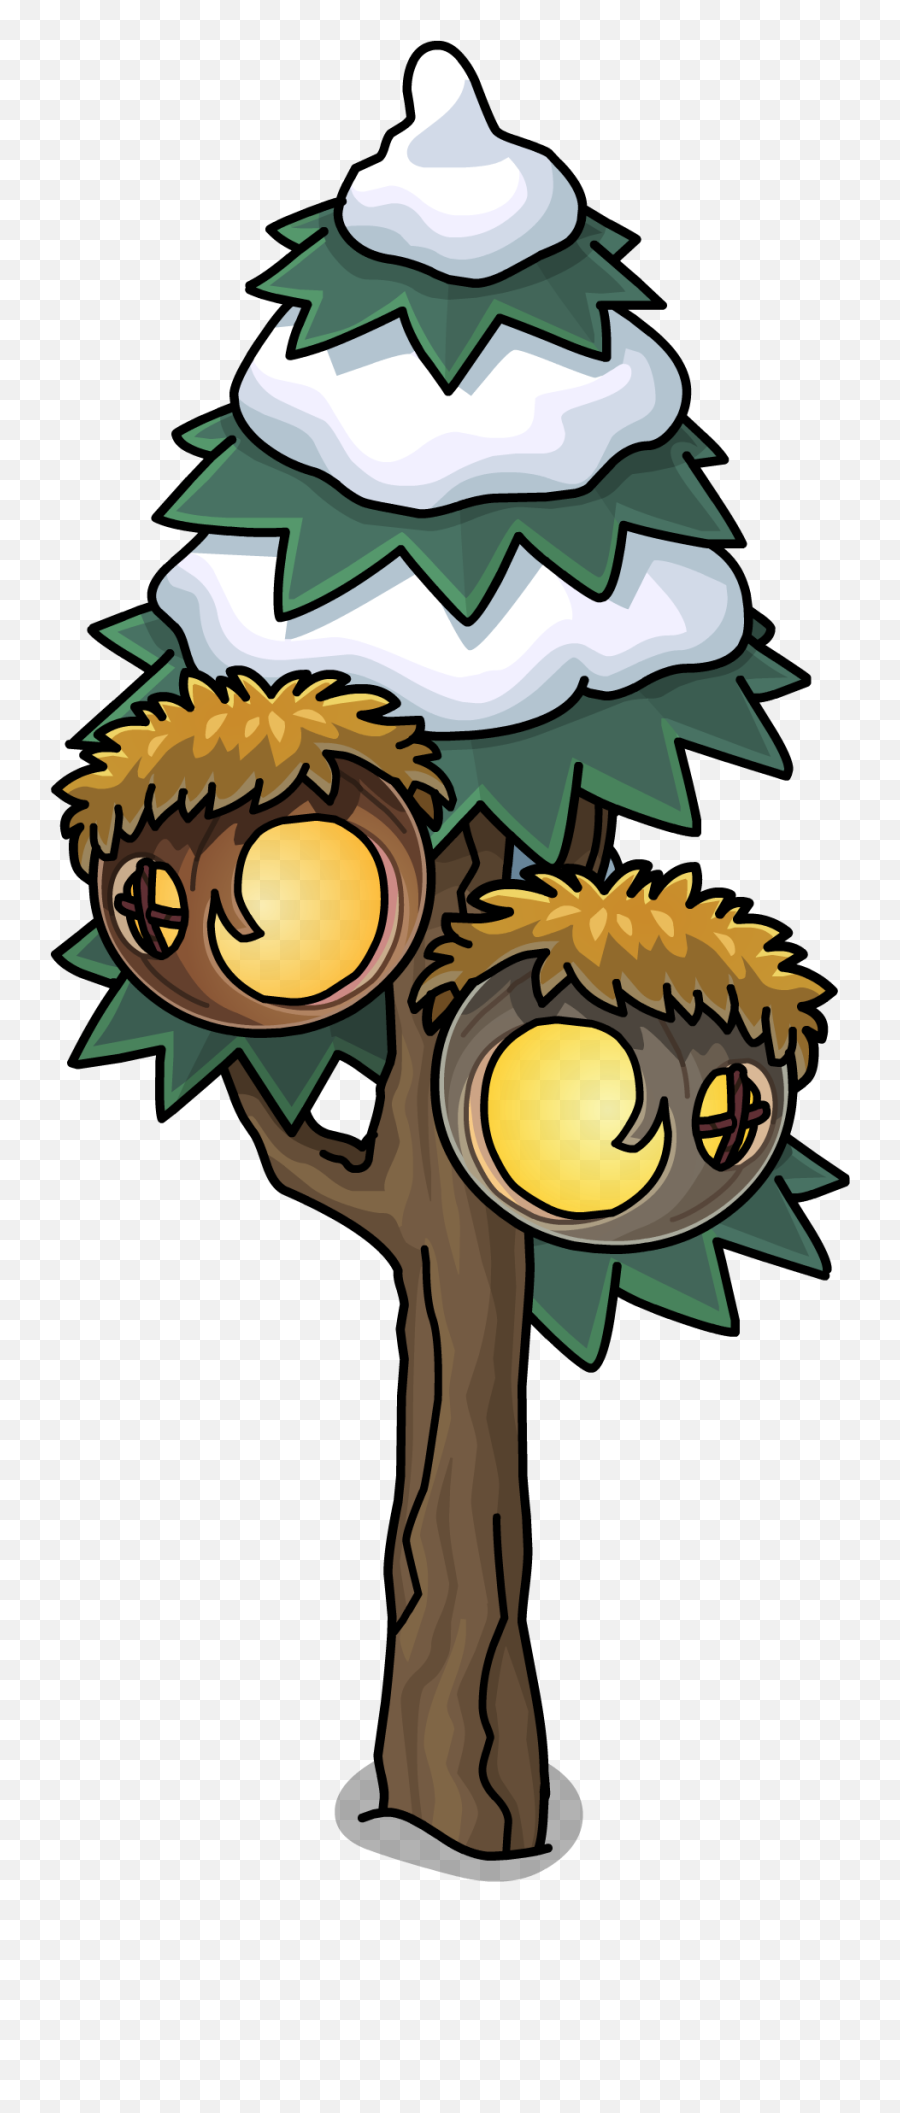 Download Hd Wilds Puffle Treehouse In - Game Cartoon Club Penguin Tree Png,Treehouse Png